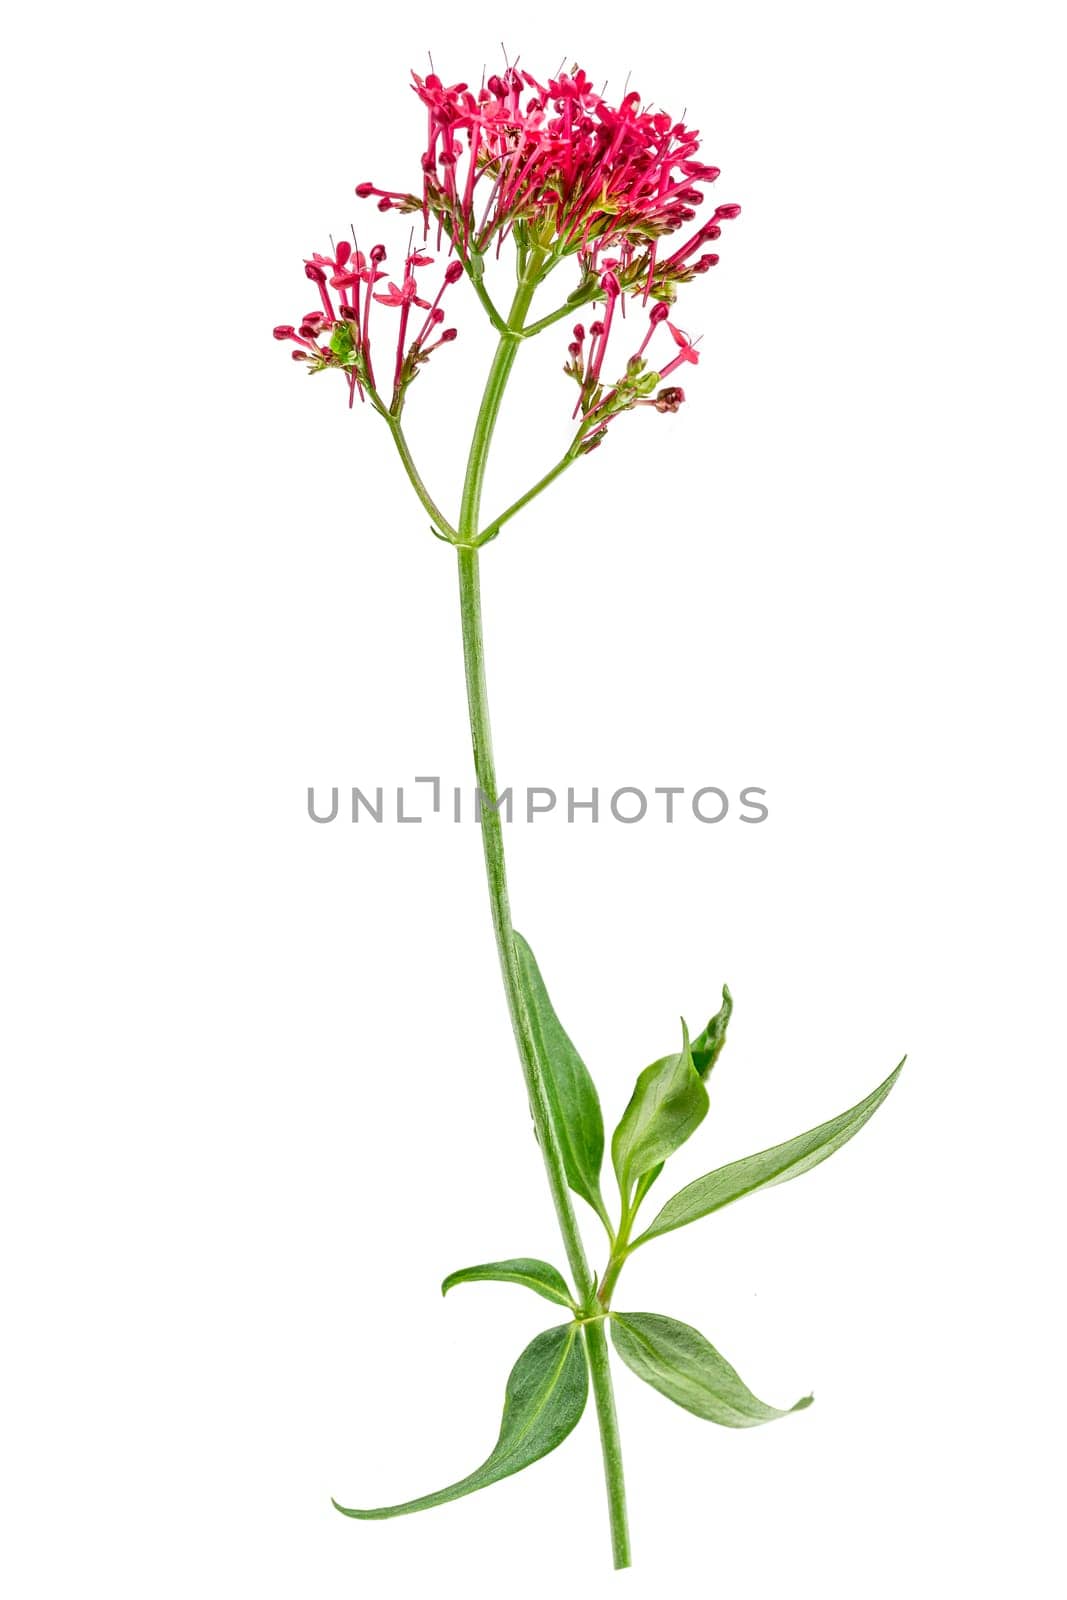 Red Valerian, Centranthus ruber, flower and foliage isolated against white by JPC-PROD